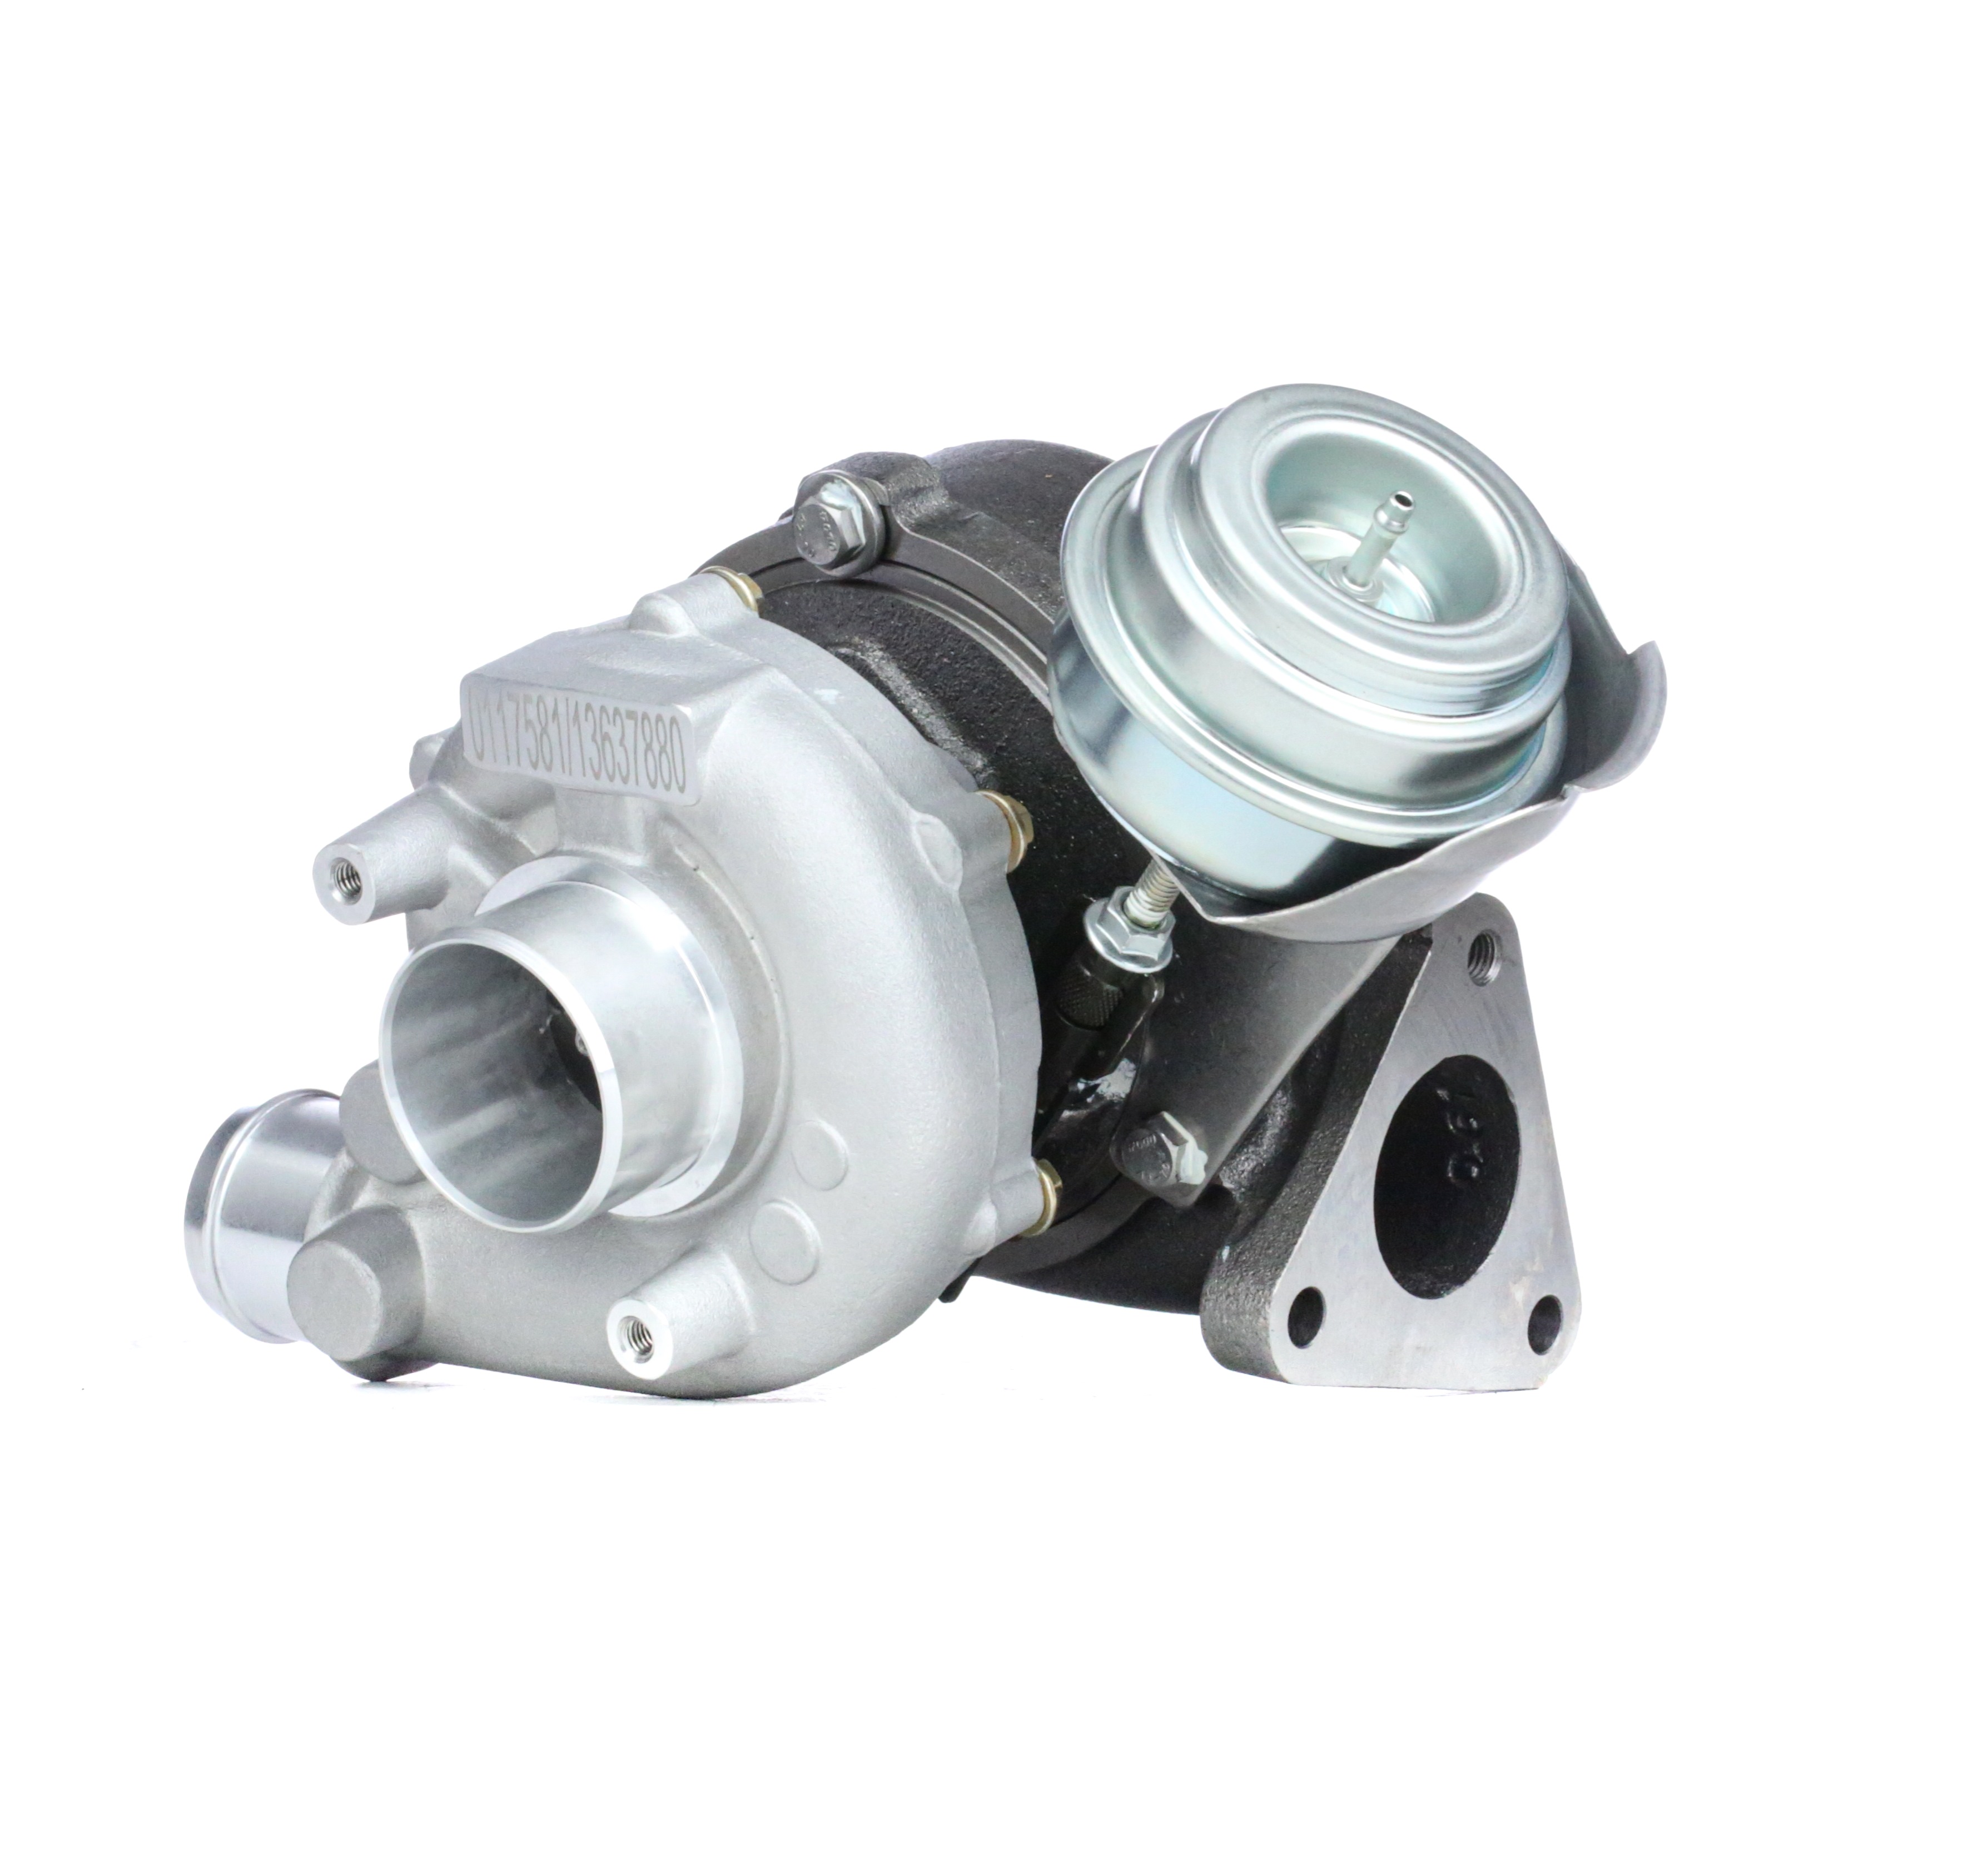 STARK SKCT-1190152 Turbocharger Exhaust Turbocharger, Diesel, Euro 4, Pneumatic, without attachment material